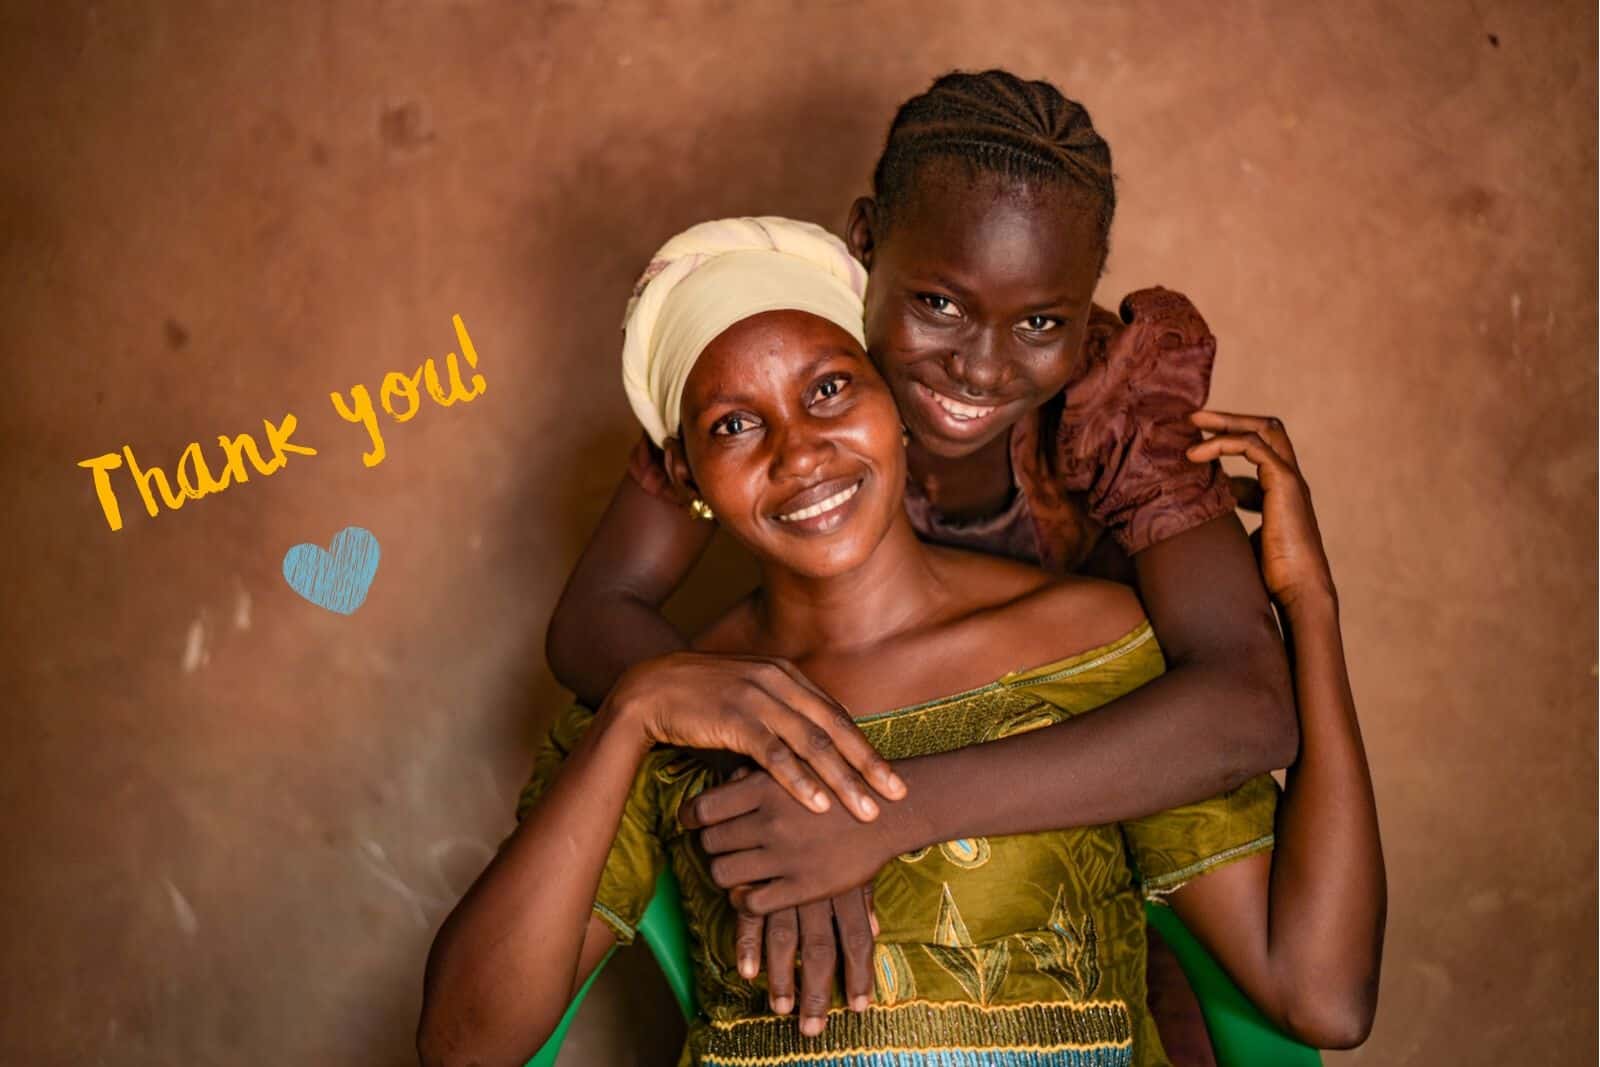 A girl in a brown dress puts her arms around a woman in a green dress and yellow turban, smiling. Text: "Thank You!"